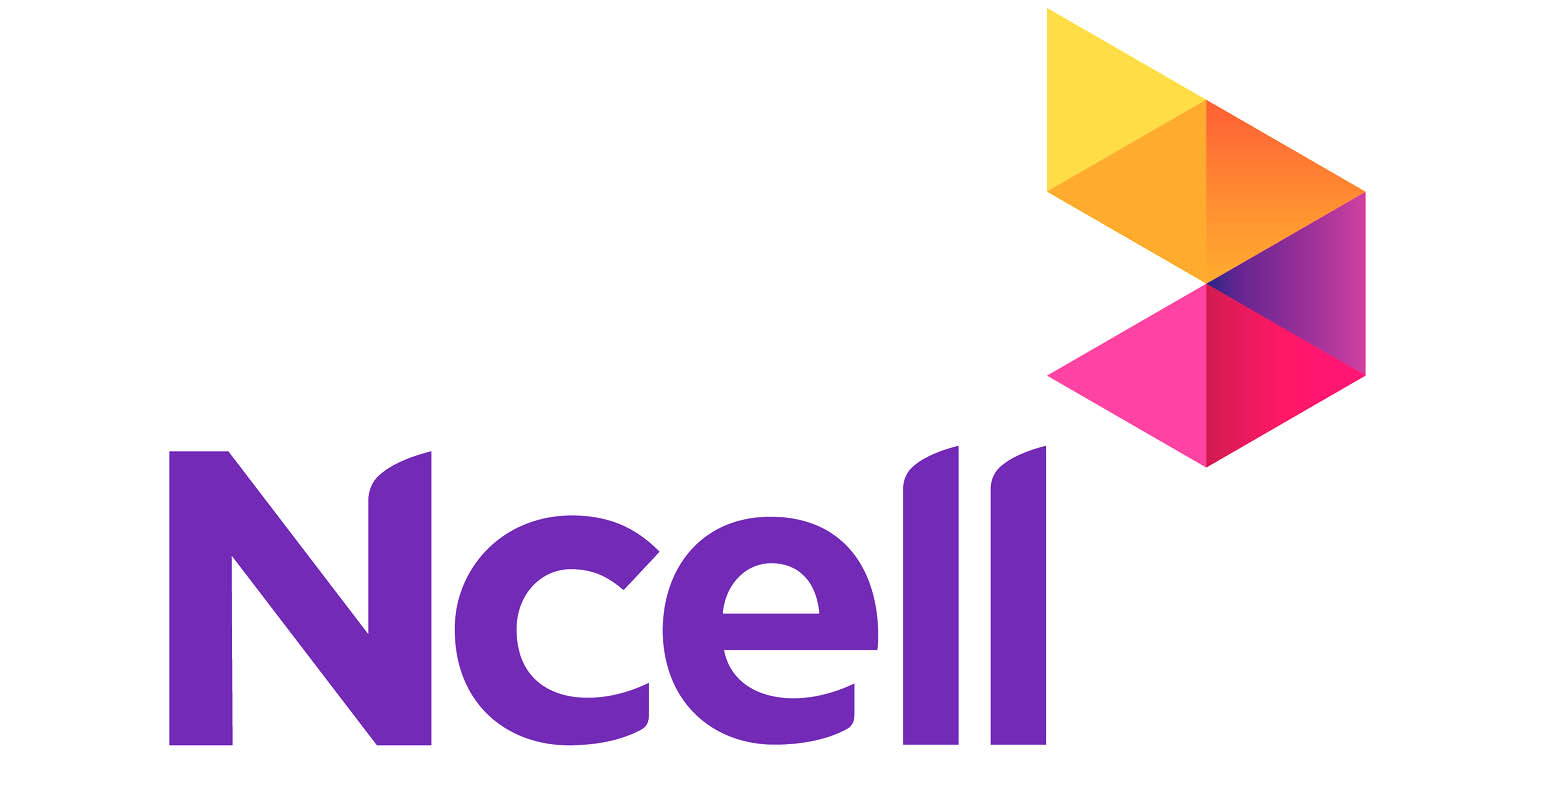 Collection Of Transaction Details Of Ncell Stakes Underway, Says Company